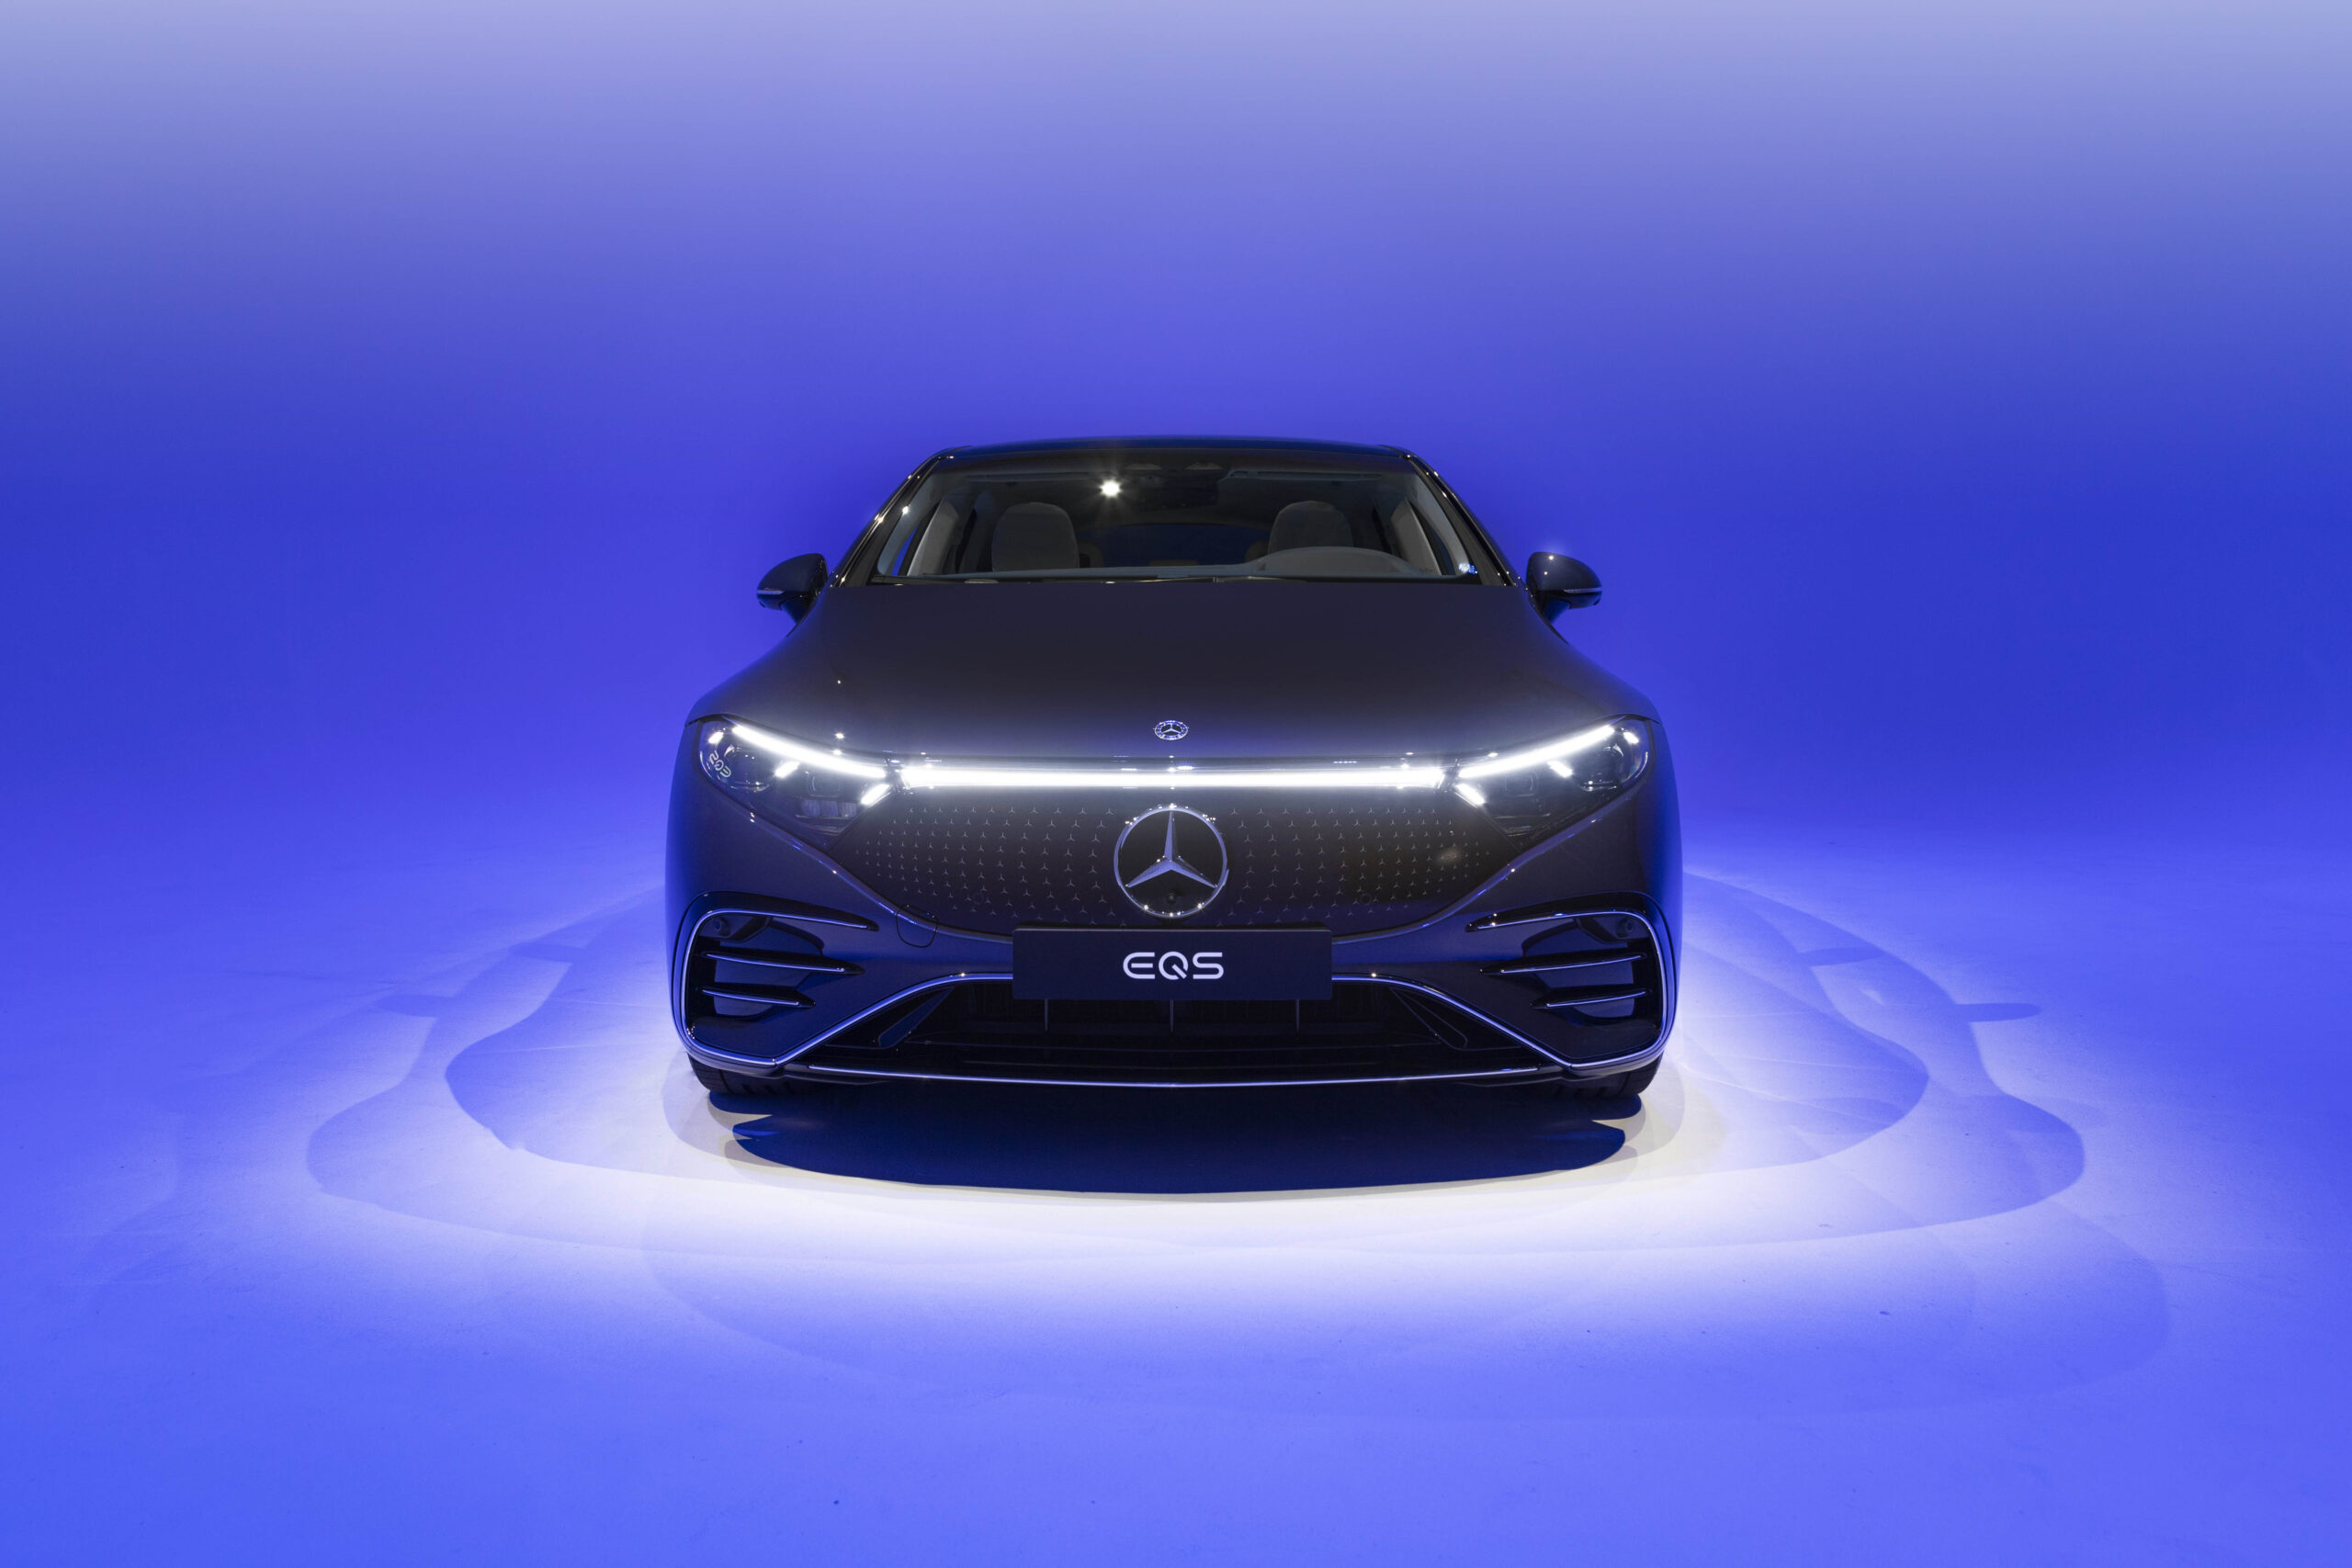 All the tech crammed into the 2022 Mercedes-Benz EQS